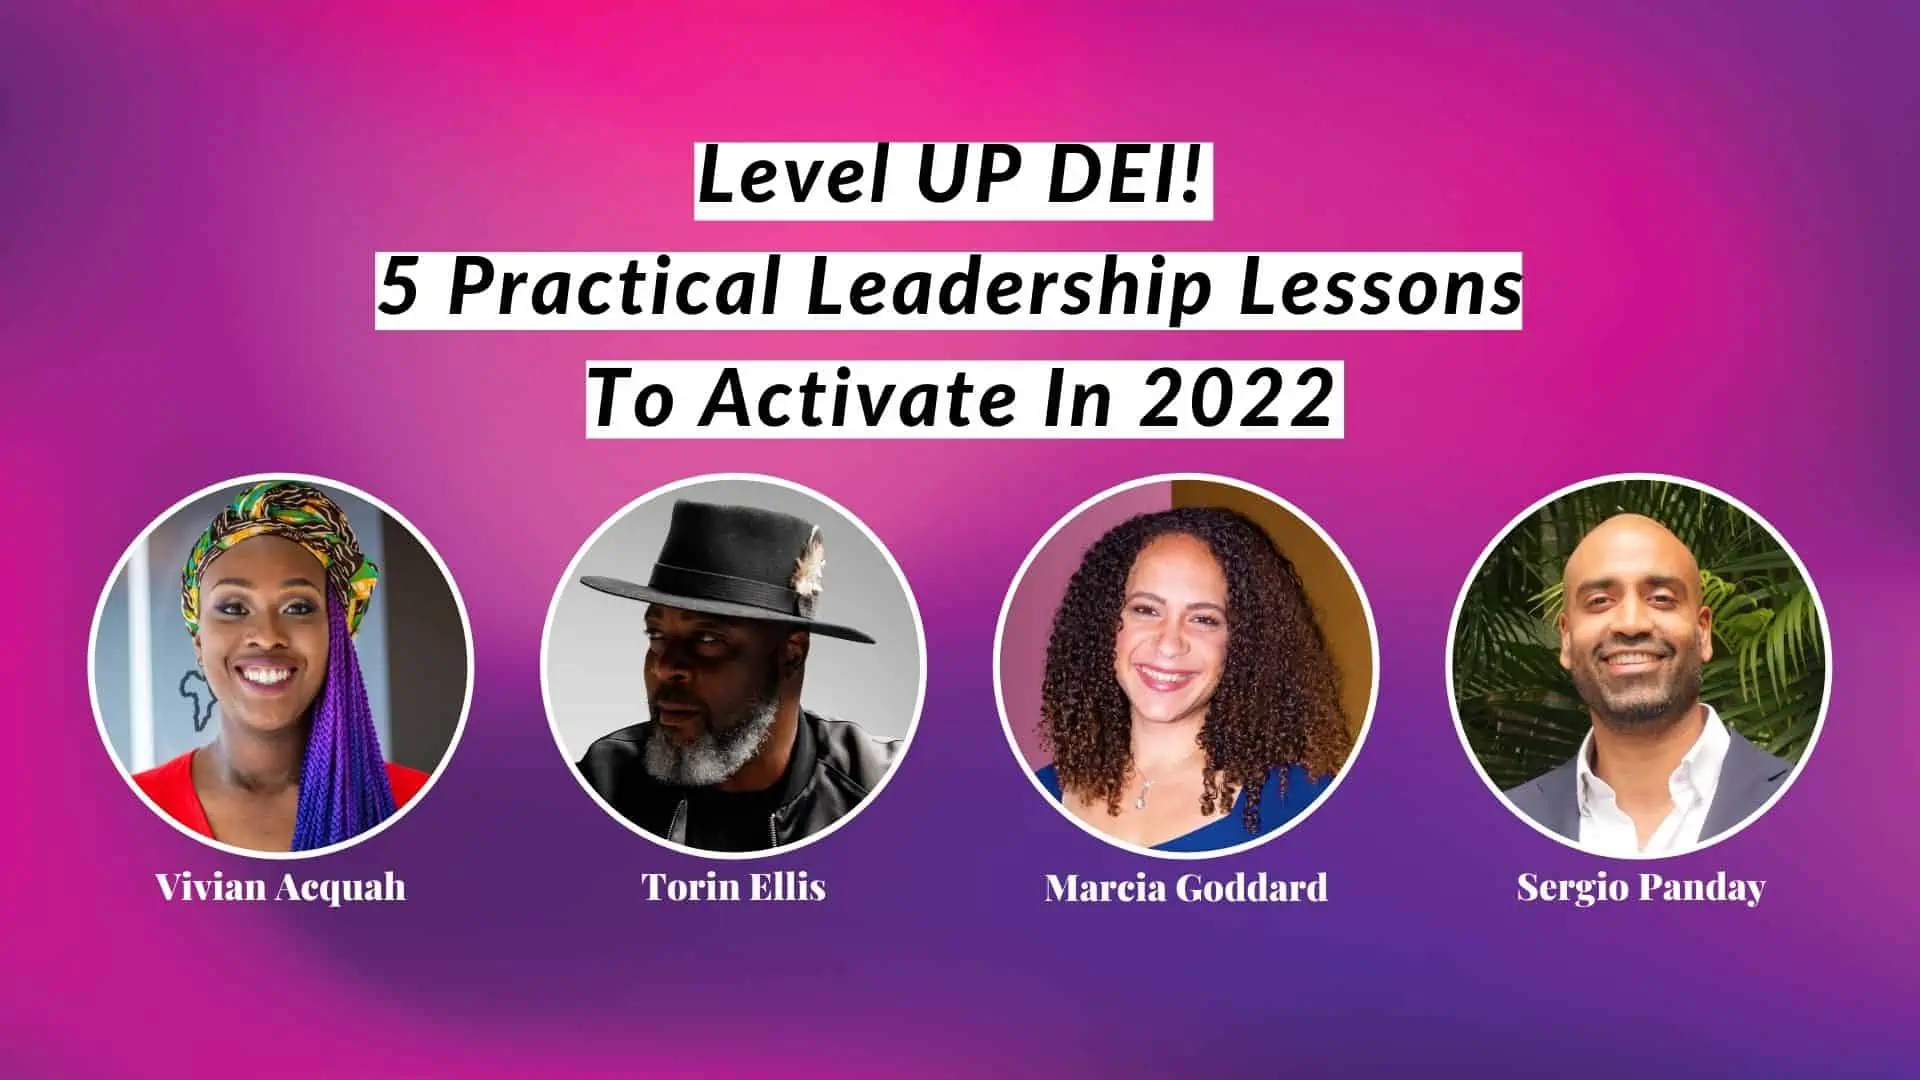 Level Up DEI 5 Practical Leadership Lessons To Activate In 2022